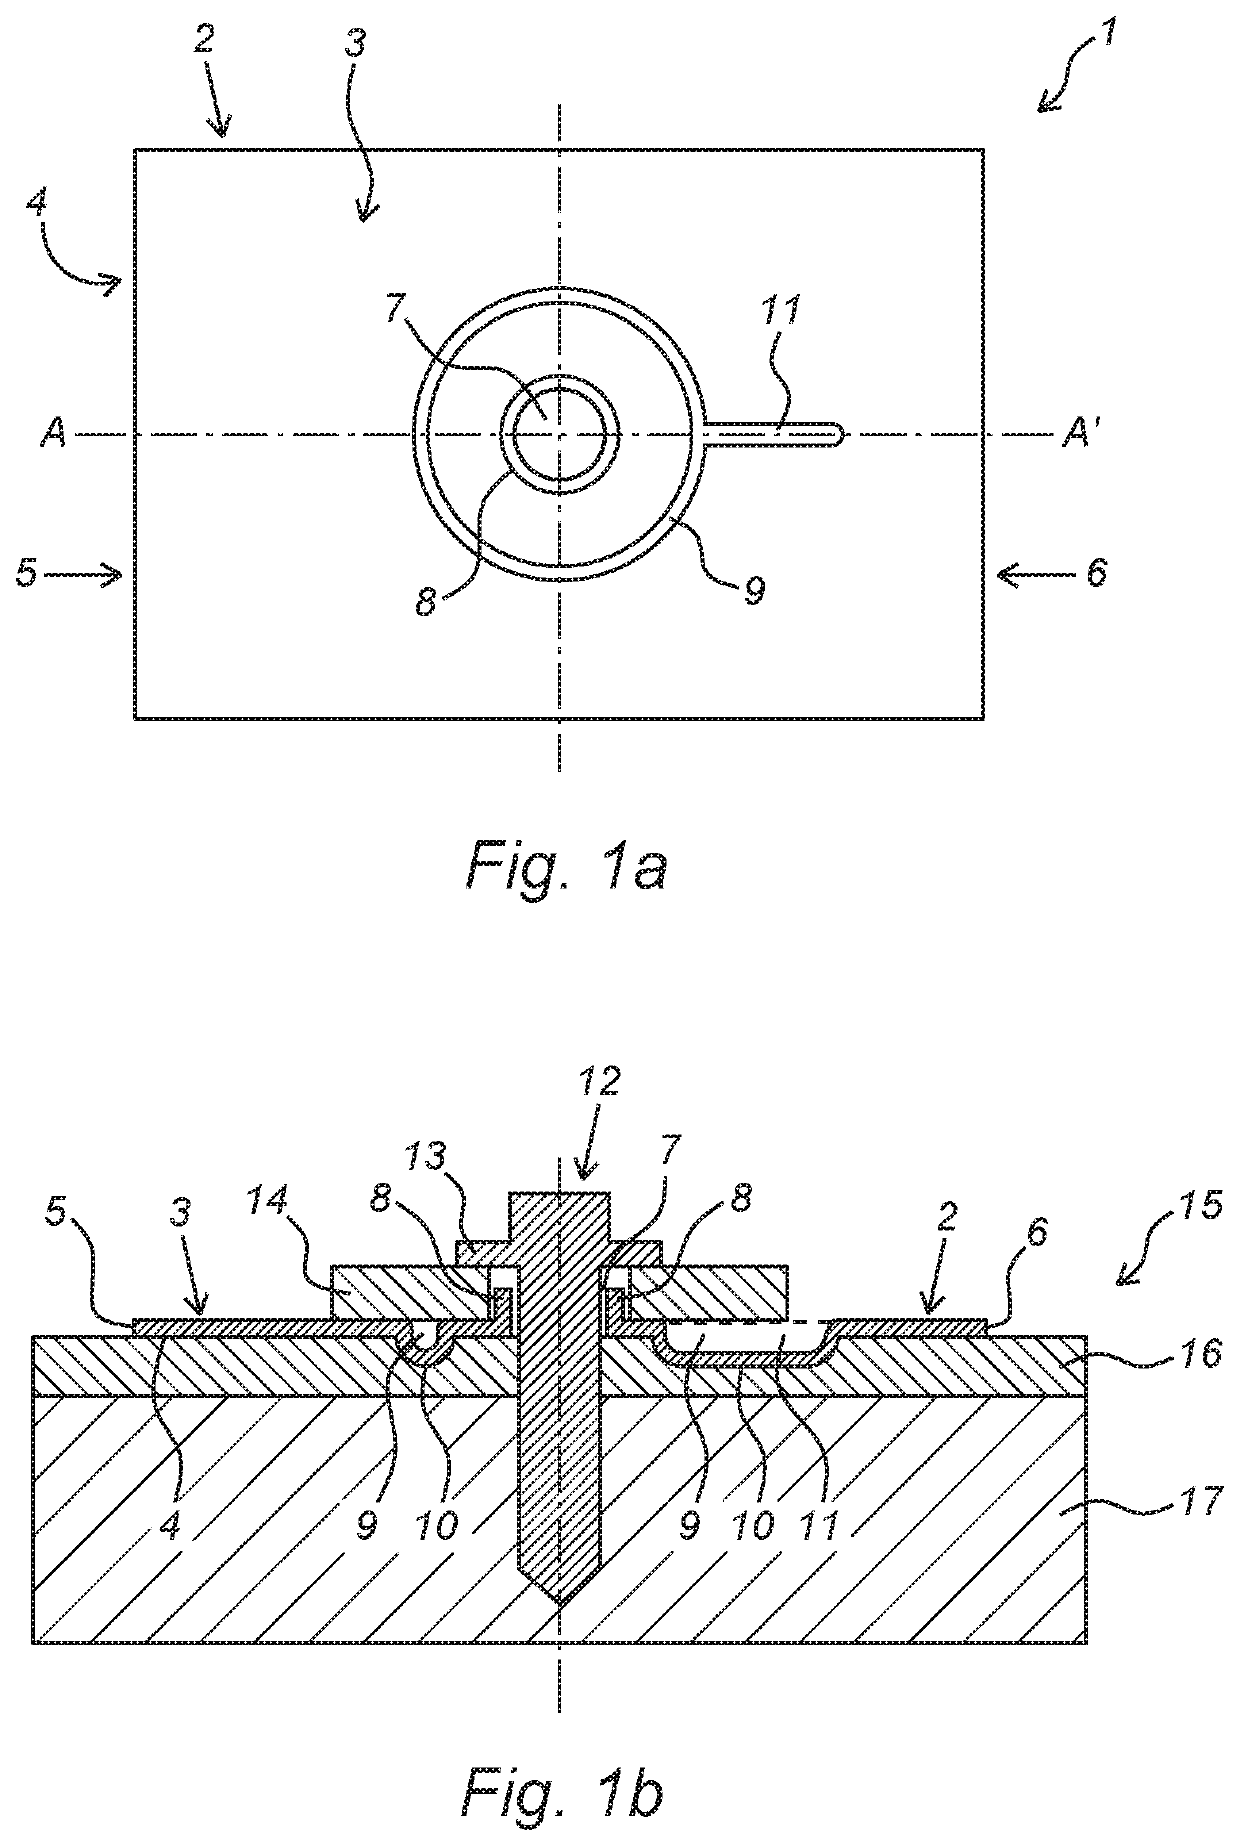 Fastening structure and method for fitting a coupling profile to a pitched roof covered with shingles